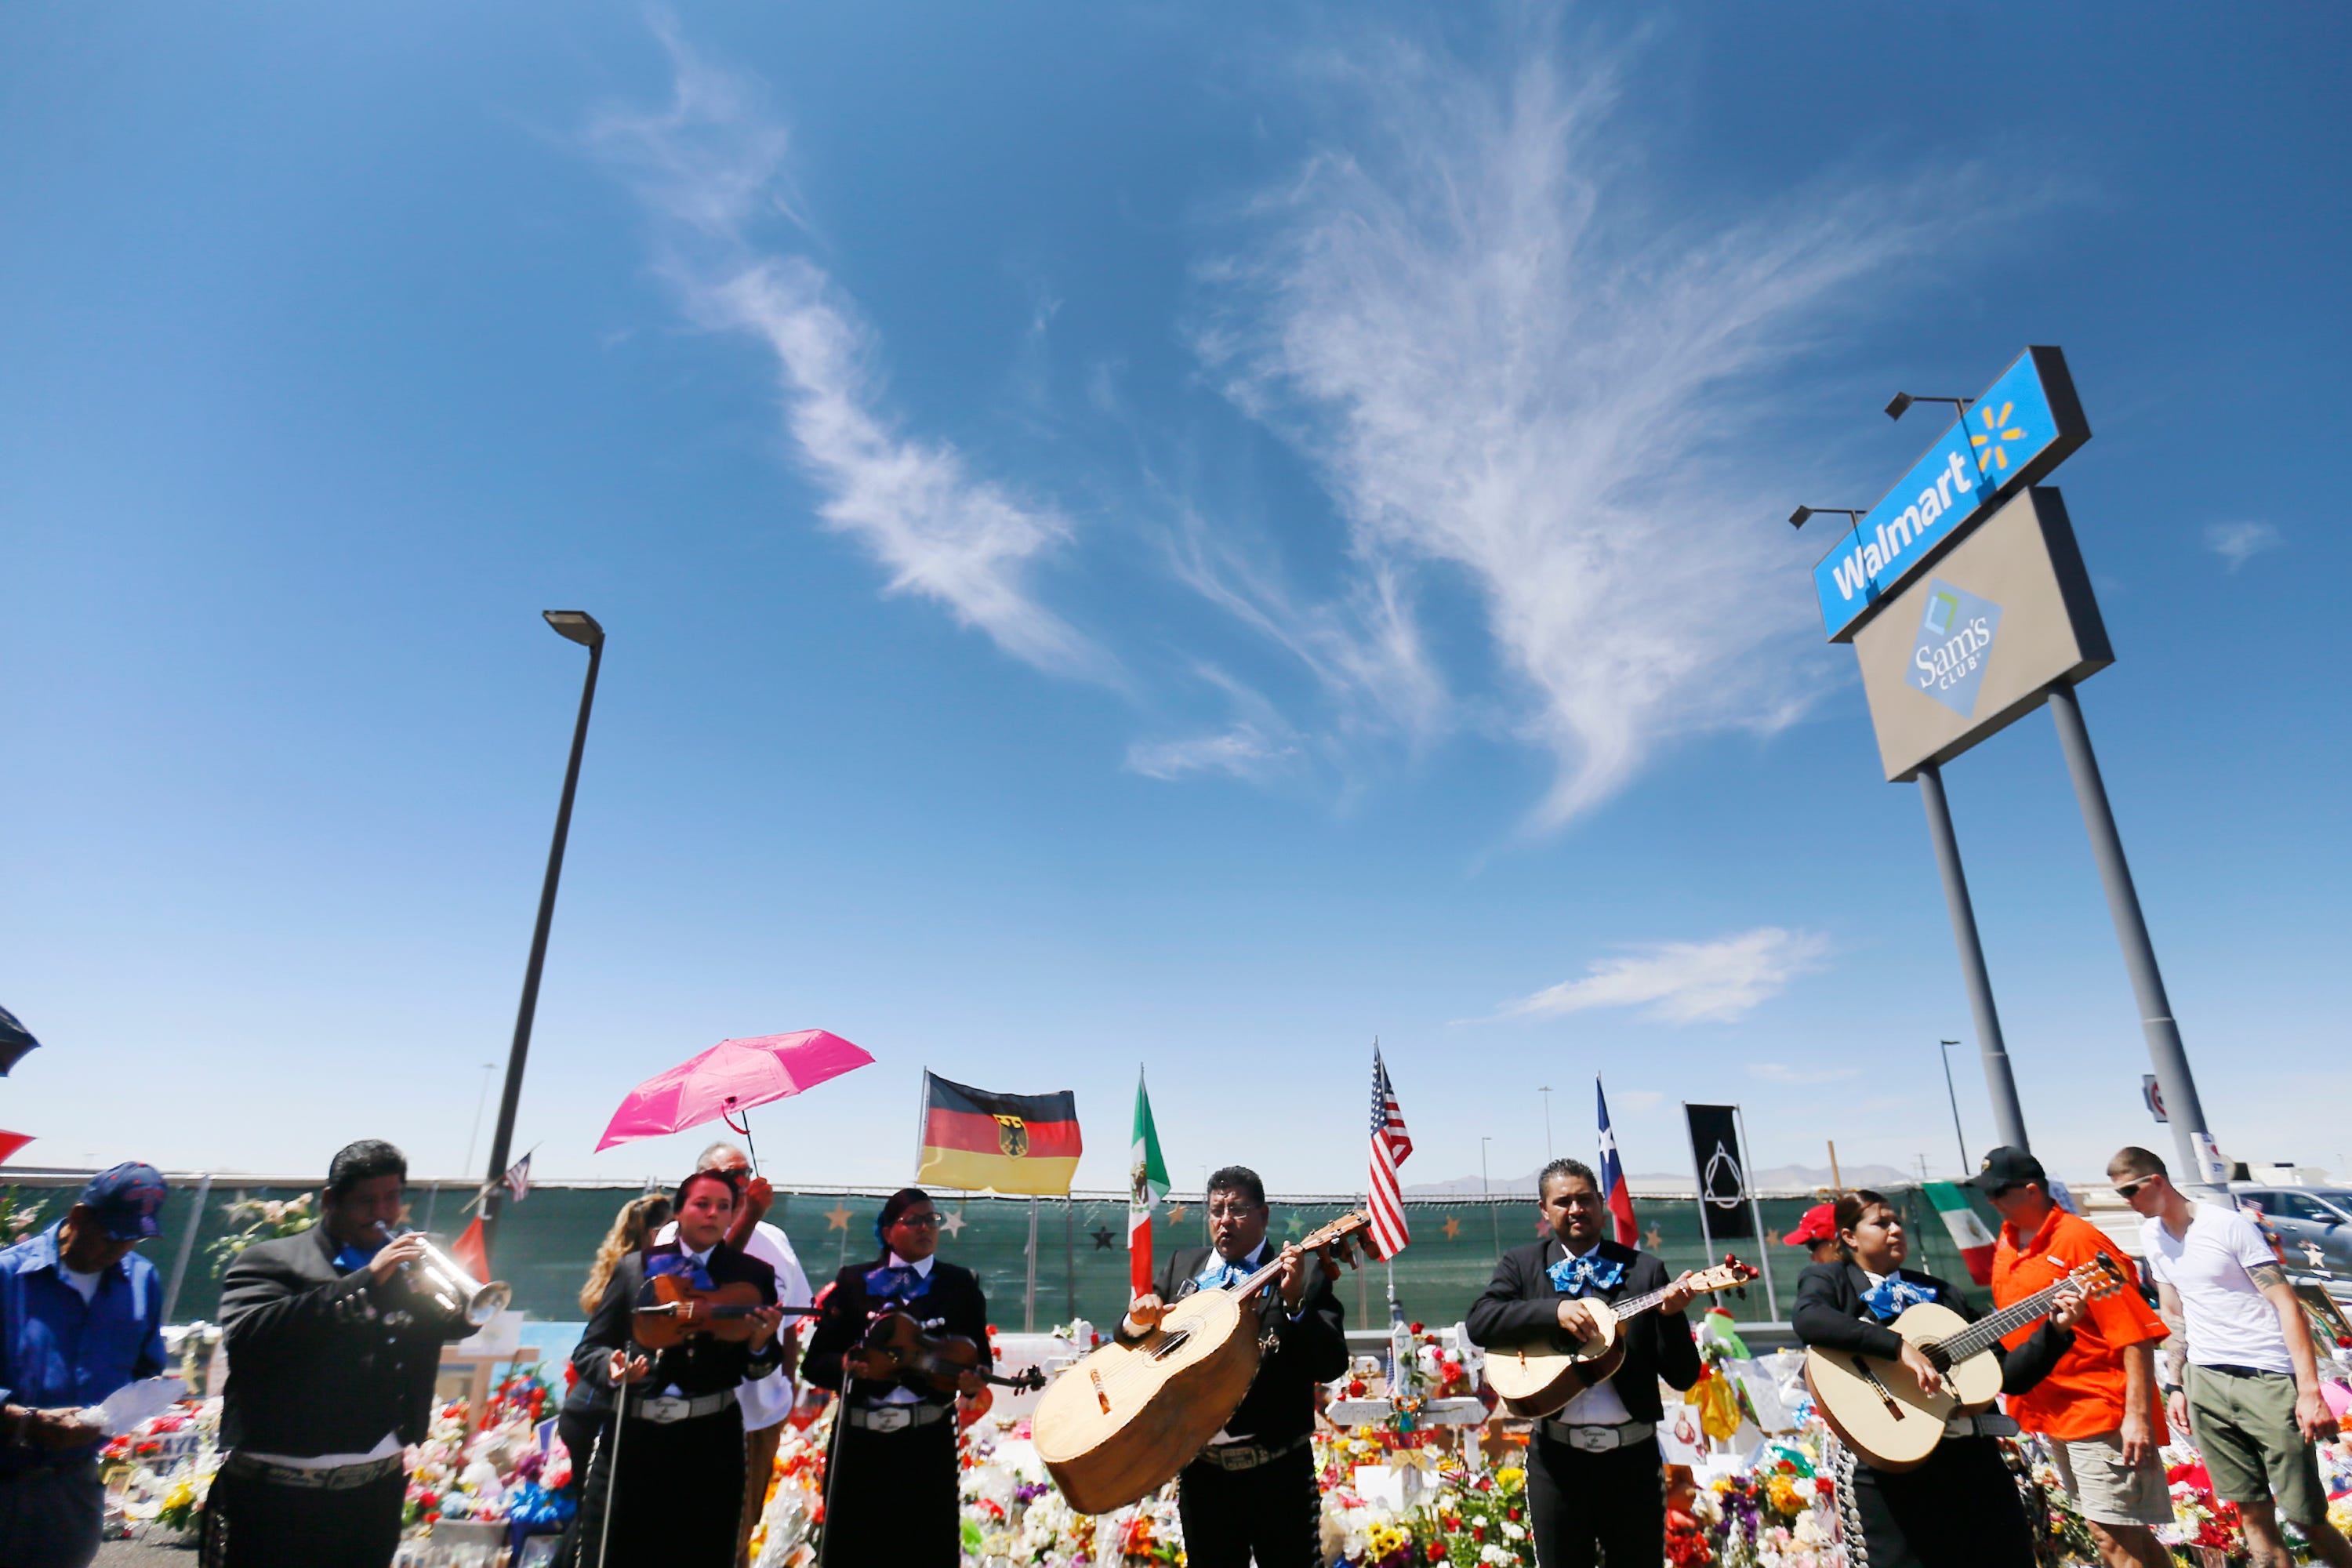 A procession of 22 hearses fills the Walmart shooting memorial site to honor all of the victims of the Aug. 3 attack Sunday, Aug. 18, in El Paso. The flowers were sent from across the world for the funeral services for Margie Reckard.